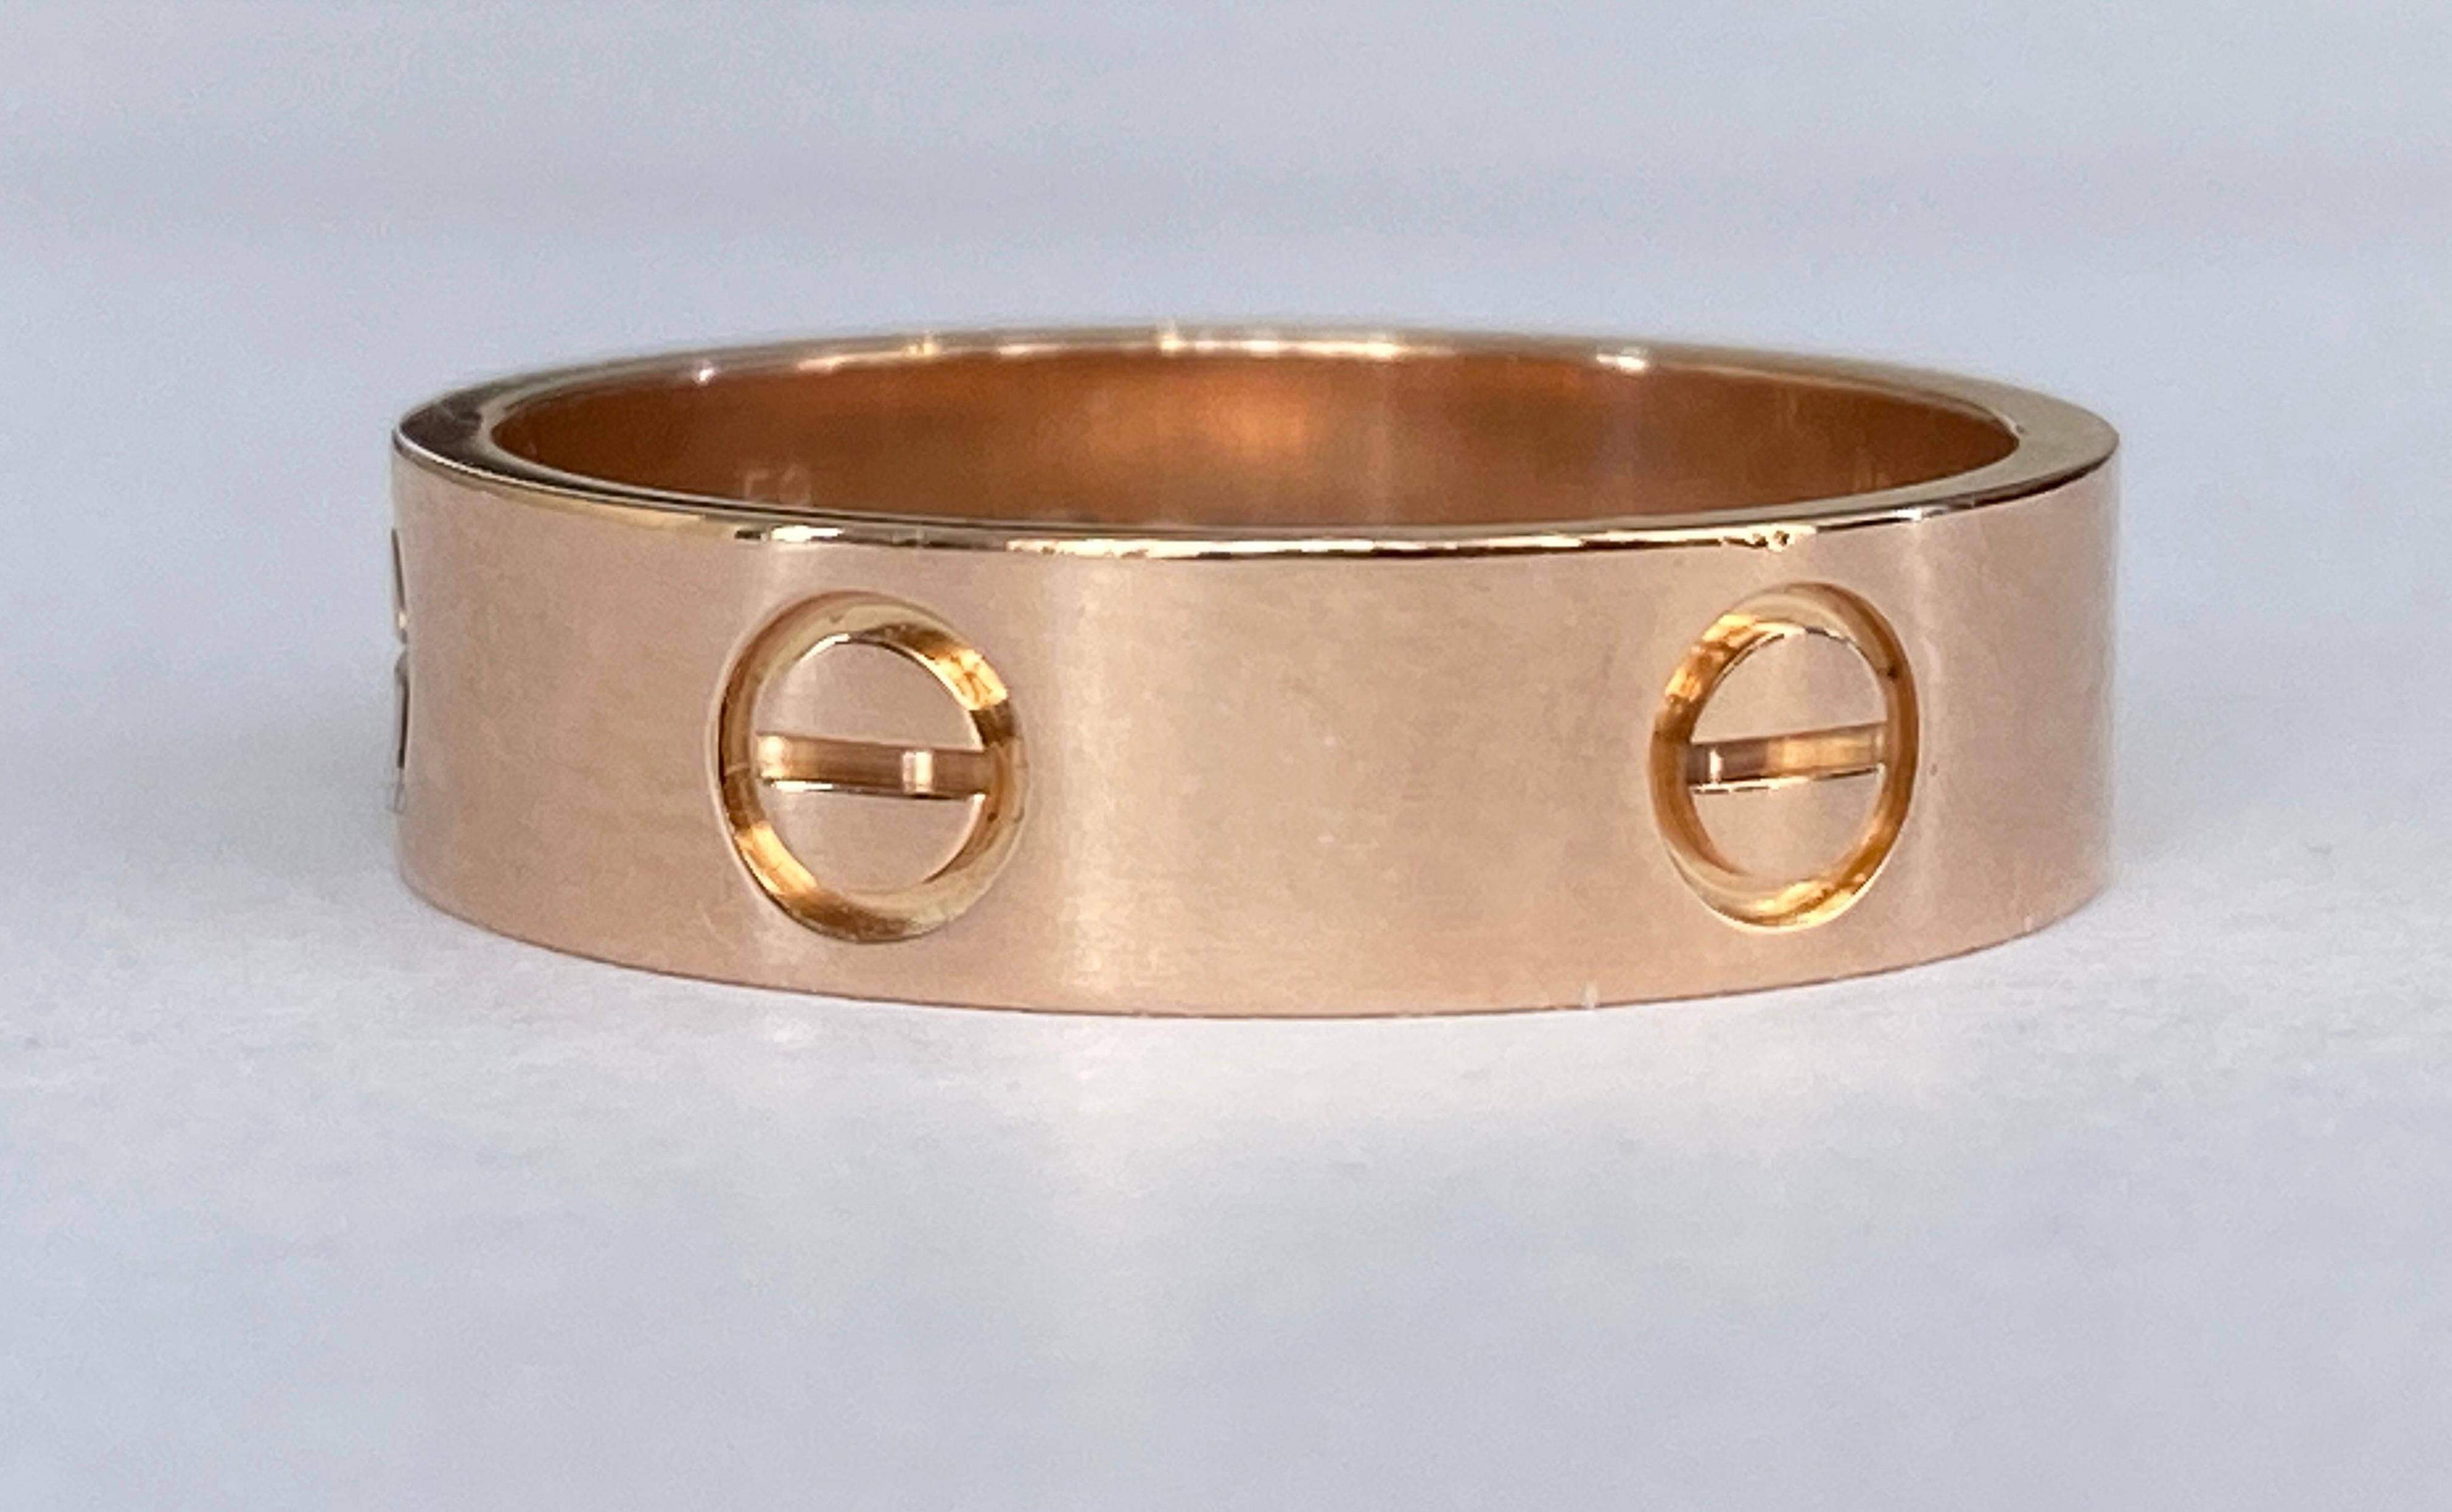 Offered Pink gold Love Cartier ring  in good condition. Hallmarks: signed Cartier, 59, Au750, 750 Swiss hallmark, 750 international convention hallmark. Serial number: DAW792. Ring size: 18.75 mm / 59.  Ring width: 5.50 mm. Weight: 6.4 grams.